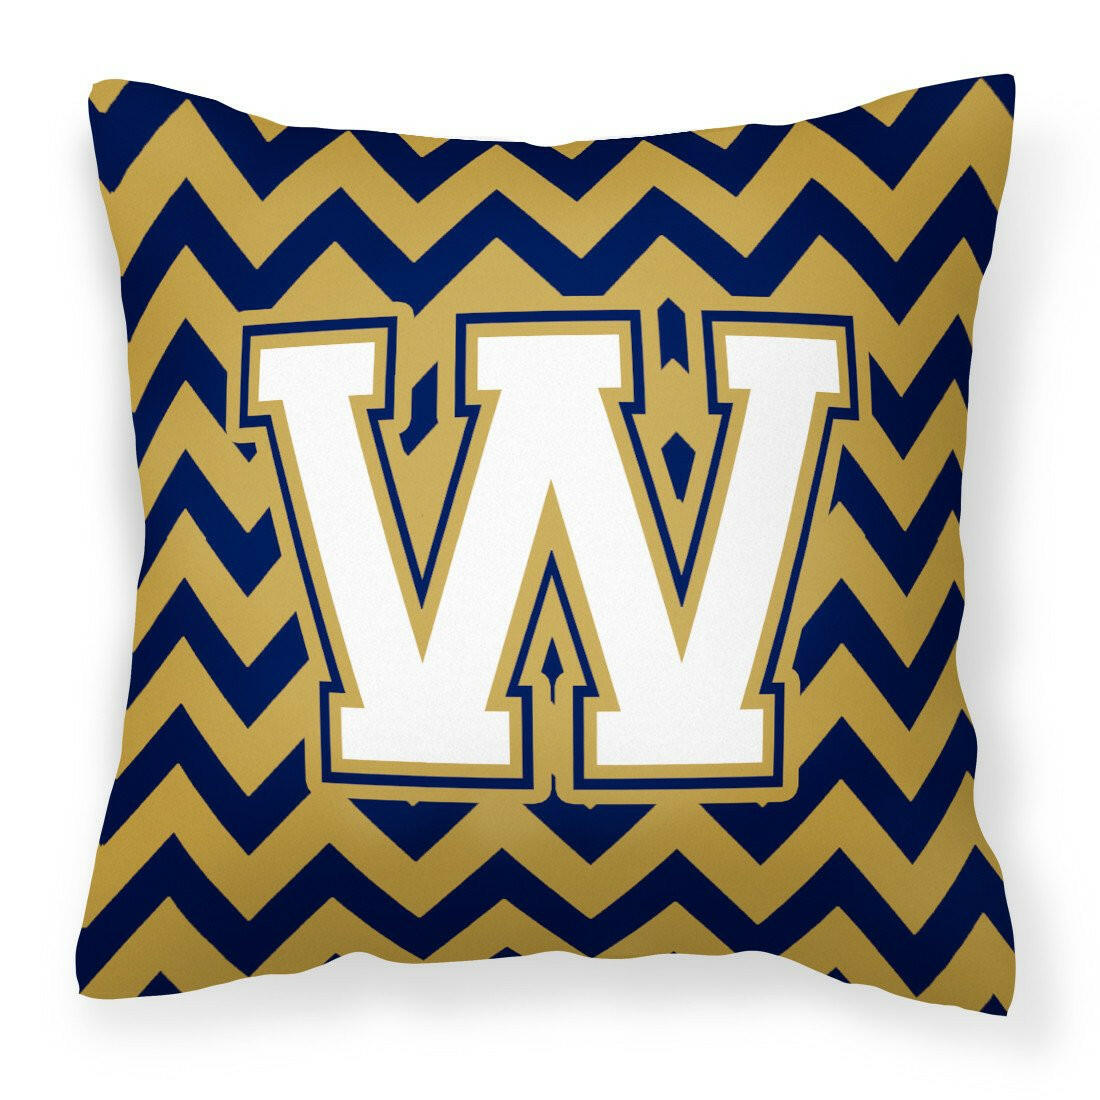 Letter W Chevron Navy Blue and Gold Fabric Decorative Pillow CJ1057-WPW1414 by Caroline's Treasures